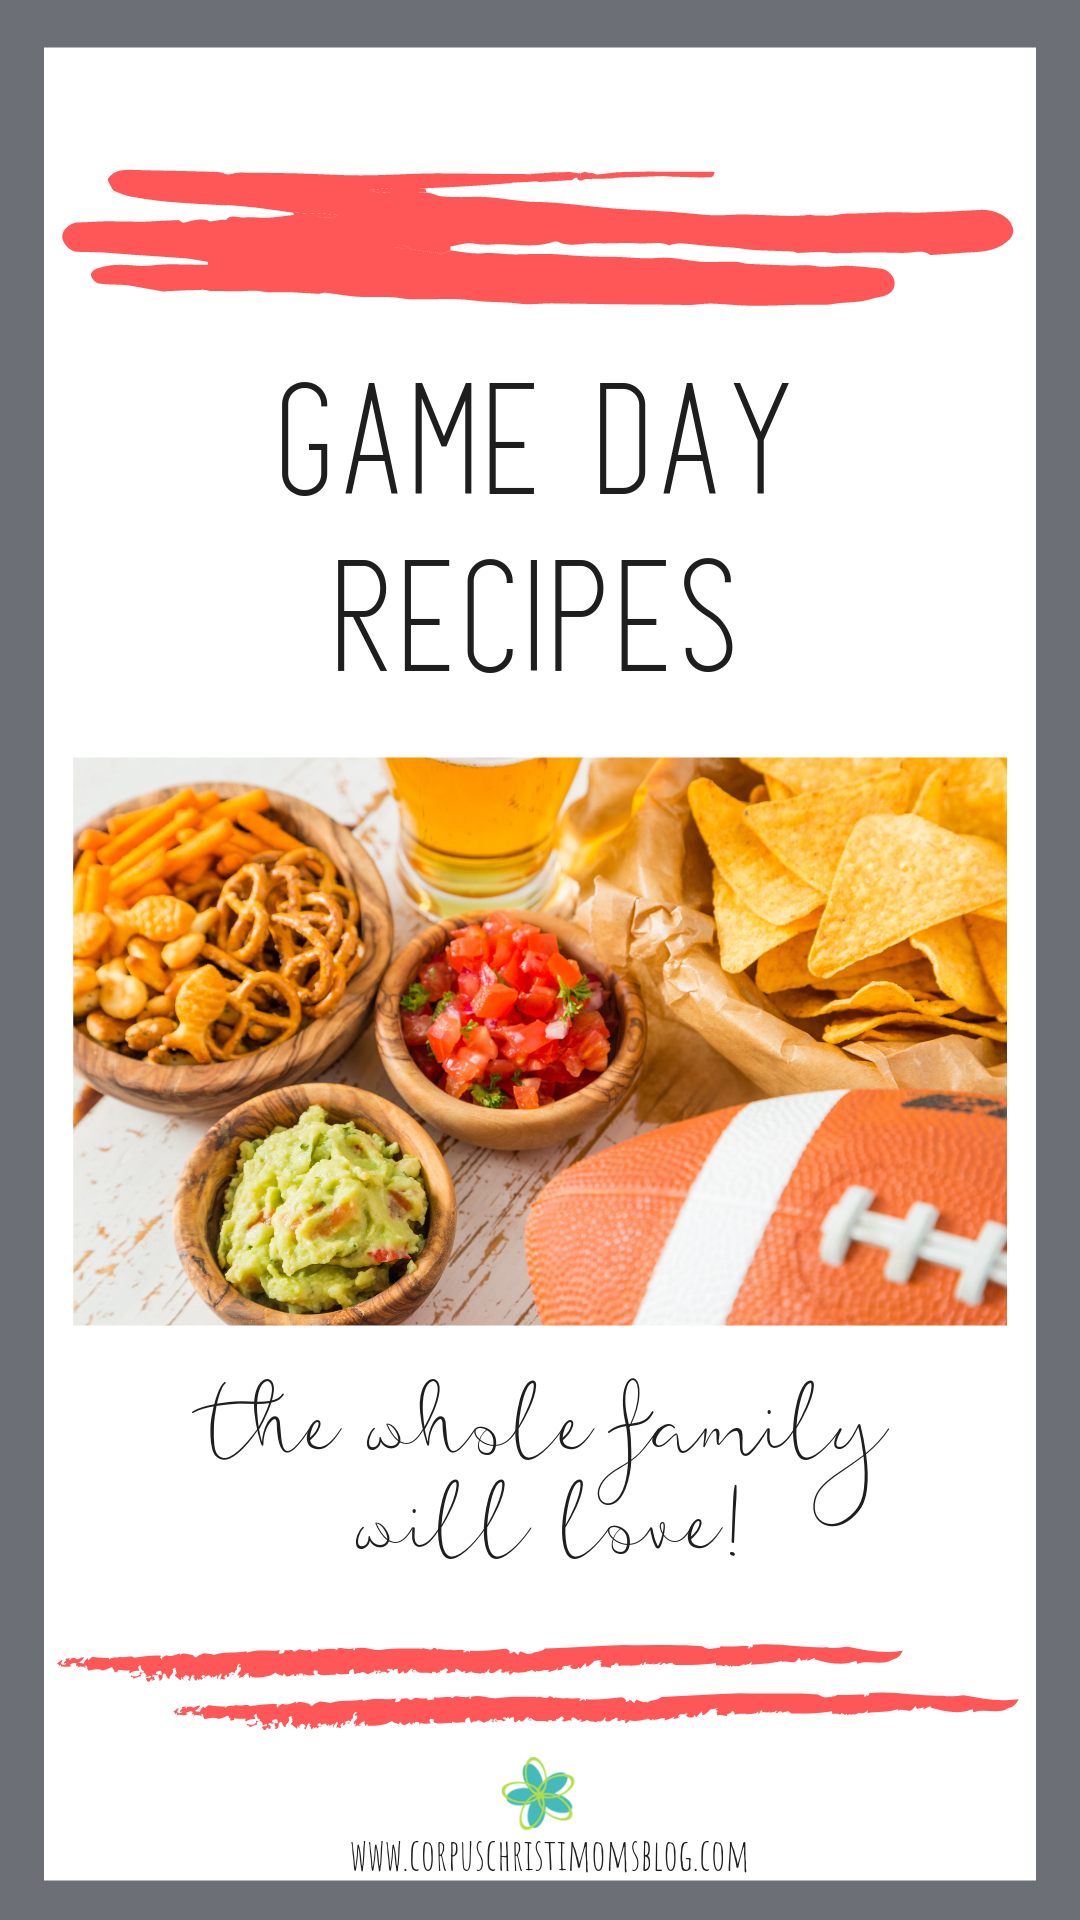 Pin_ Game Day Recipes Your Family Will Love _ Corpus Christi_ Coastal Bend Moms